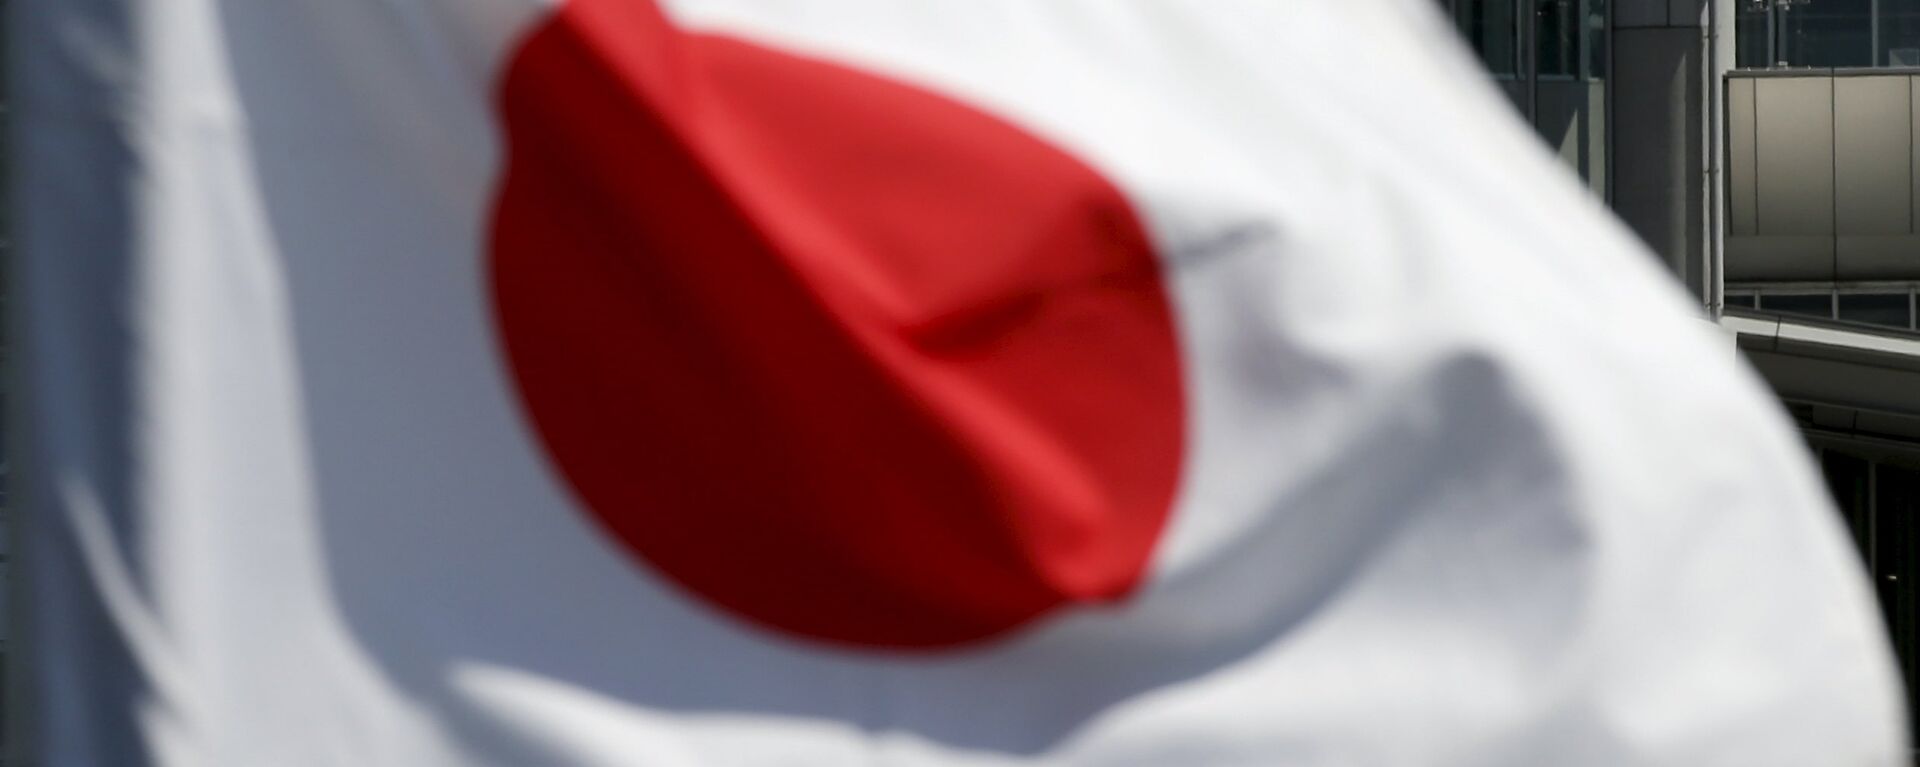 Japanese national flag at a convention centre in Tokyo May 21, 2015 - Sputnik Mundo, 1920, 04.10.2021